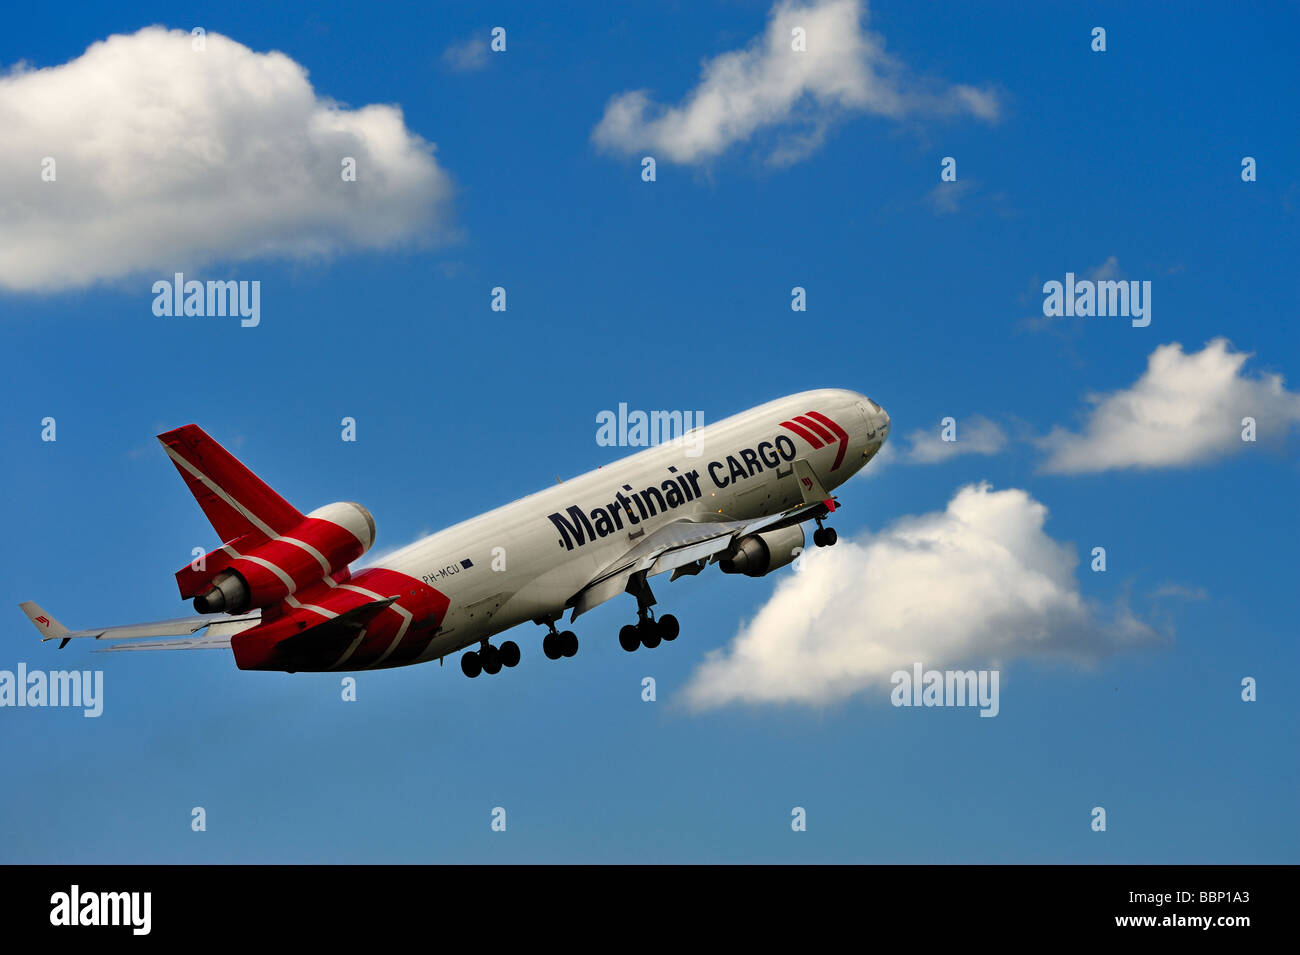 Martinair Cargo plane on take off Amsterdam airport The Netherlands Stock Photo